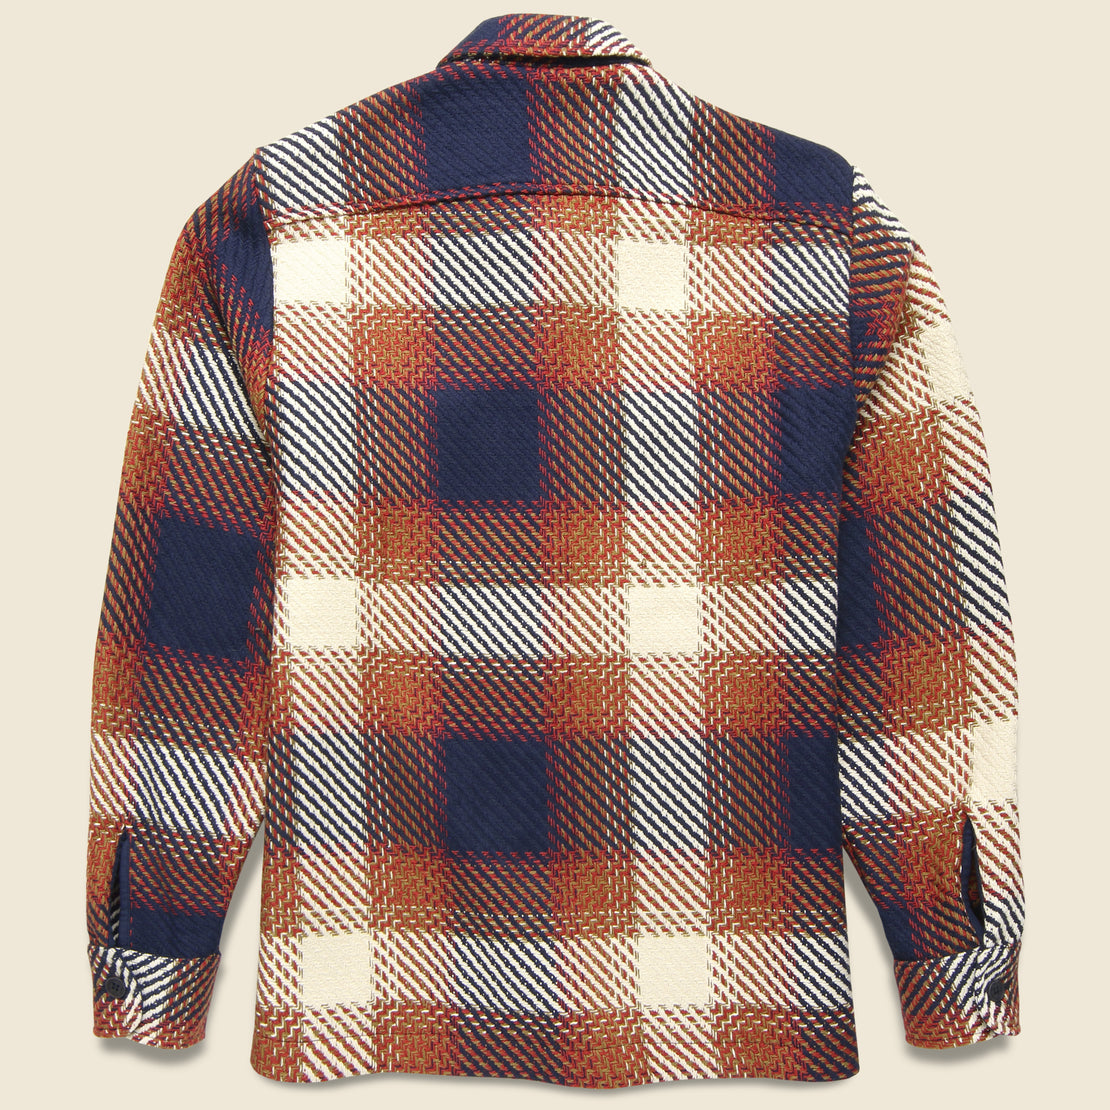 Whiting Overshirt - Navy/Red Ombre Check - Wax London - STAG Provisions - Tops - L/S Woven - Plaid